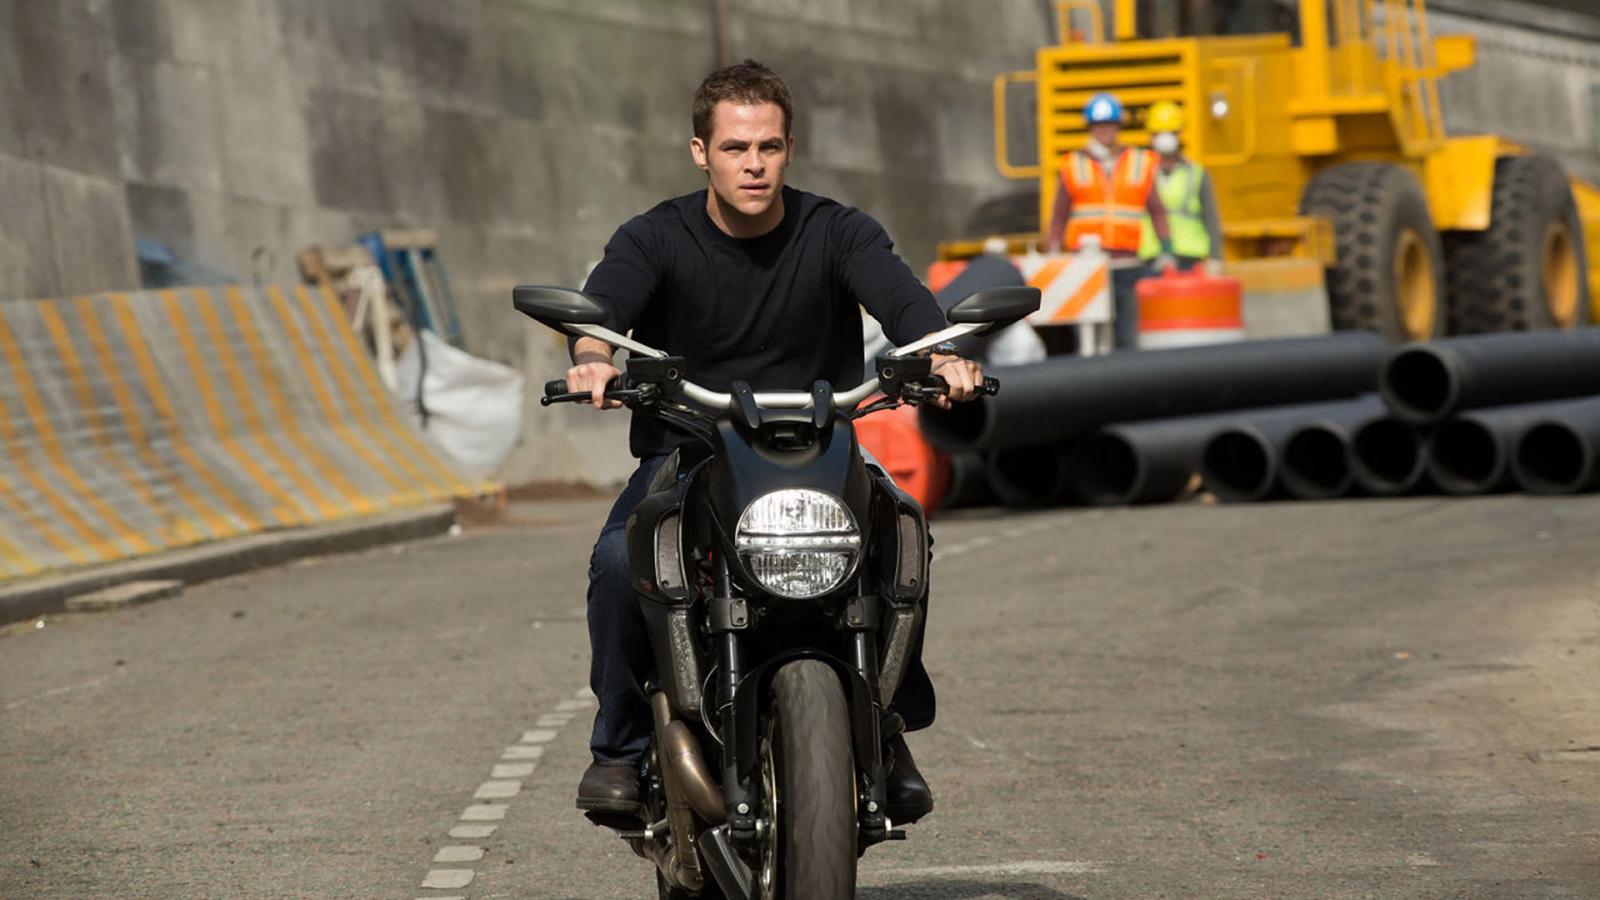 10 Lesser-Known Movies To Watch if You Like The Bourne Supremacy - image 6